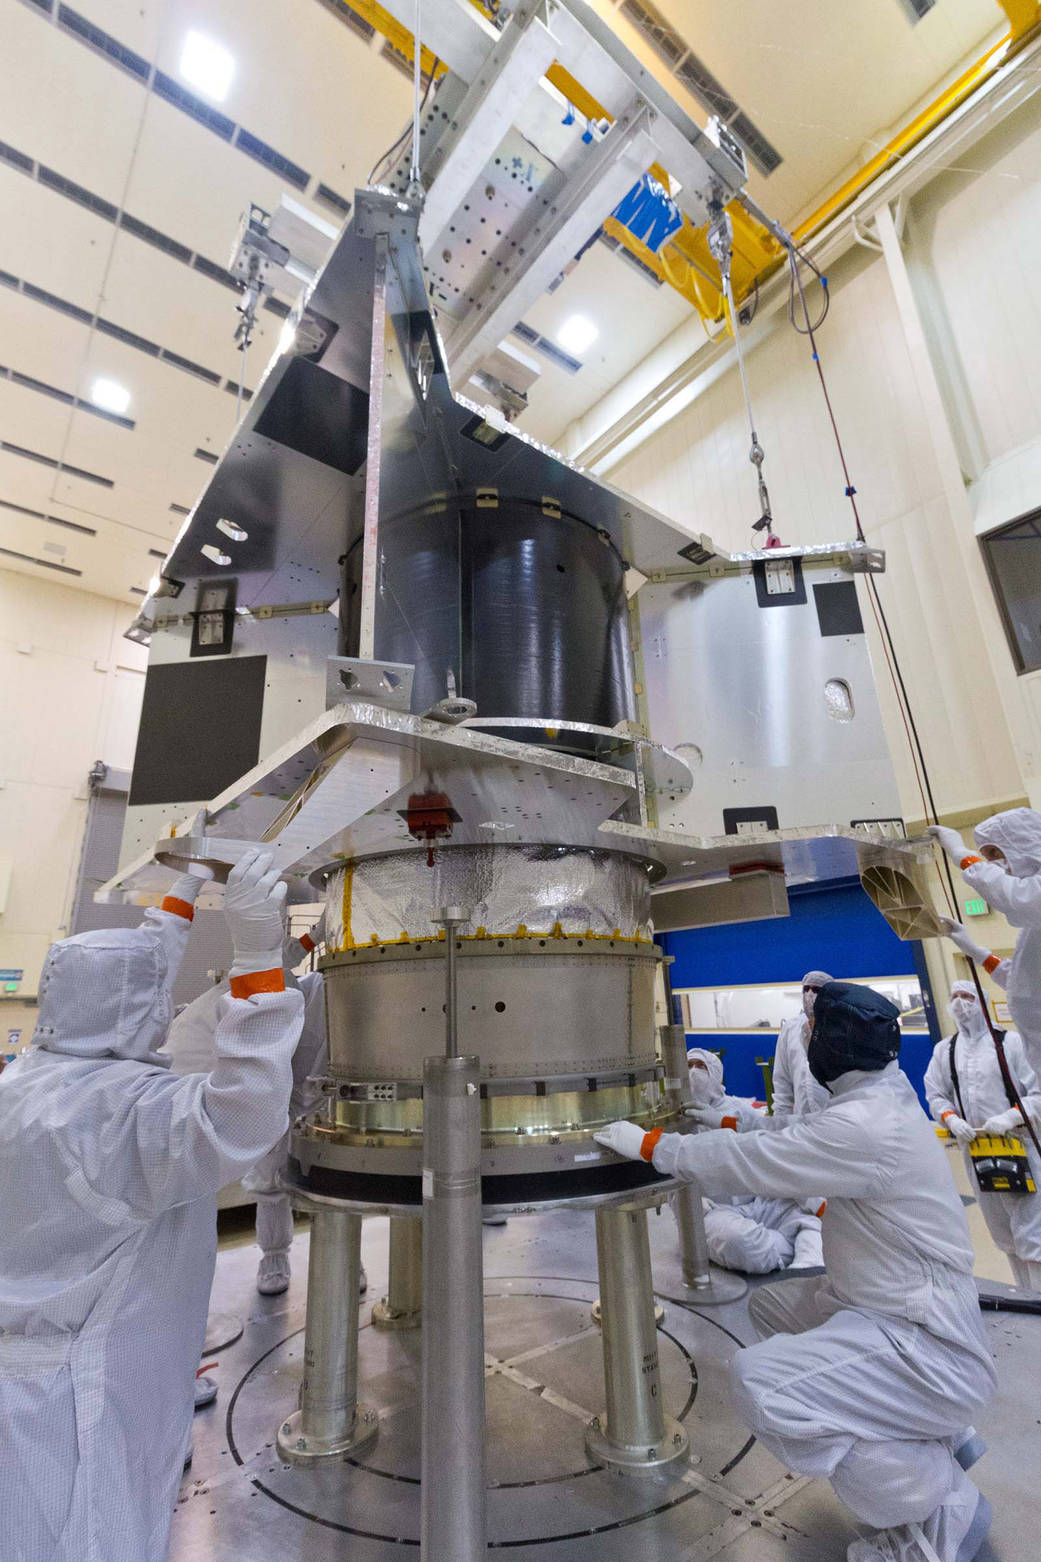 OSIRIS-REx spacecraft in the assembly and testing center.